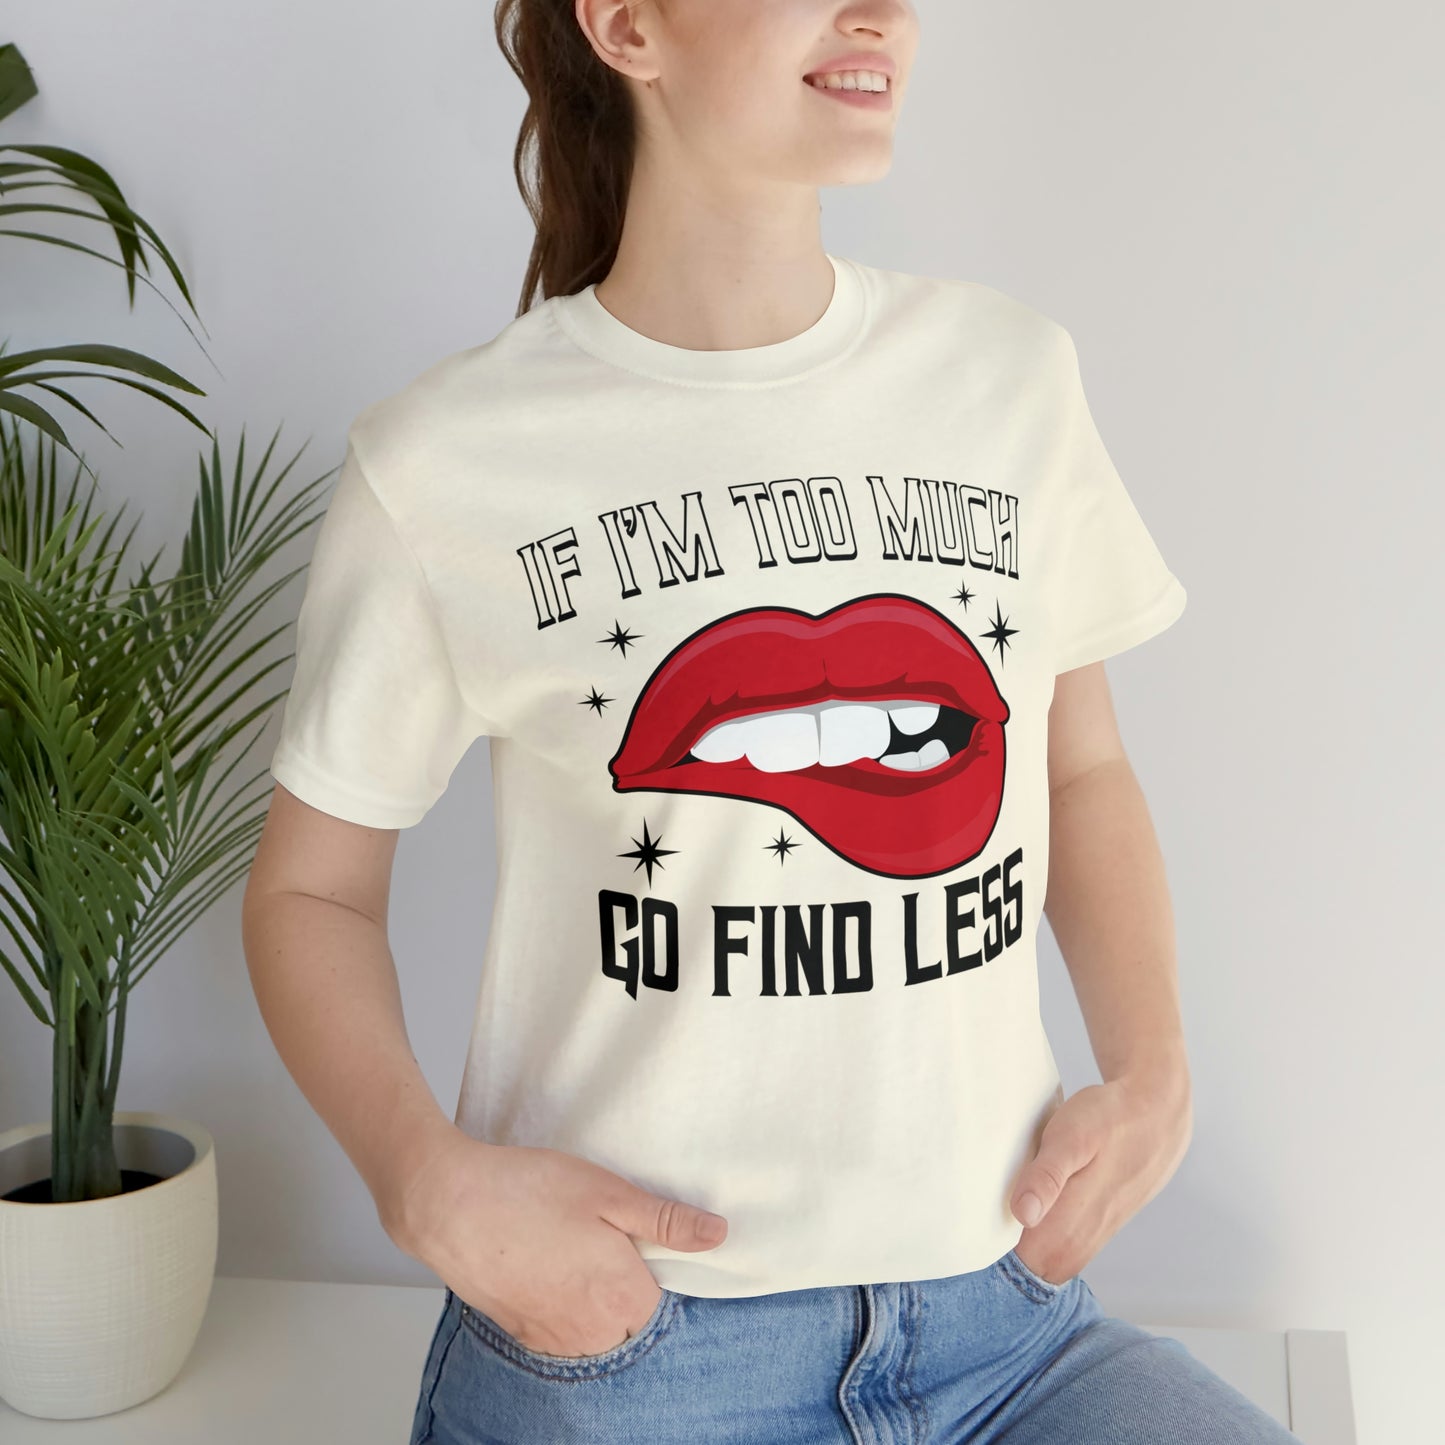 If I'm Too Much Then Go Find Less Women's T-Shirt T Shirt Custom Graphic Tee Unisex Girl Power Sarcasm Feminist Humor Funny Short Sleeve